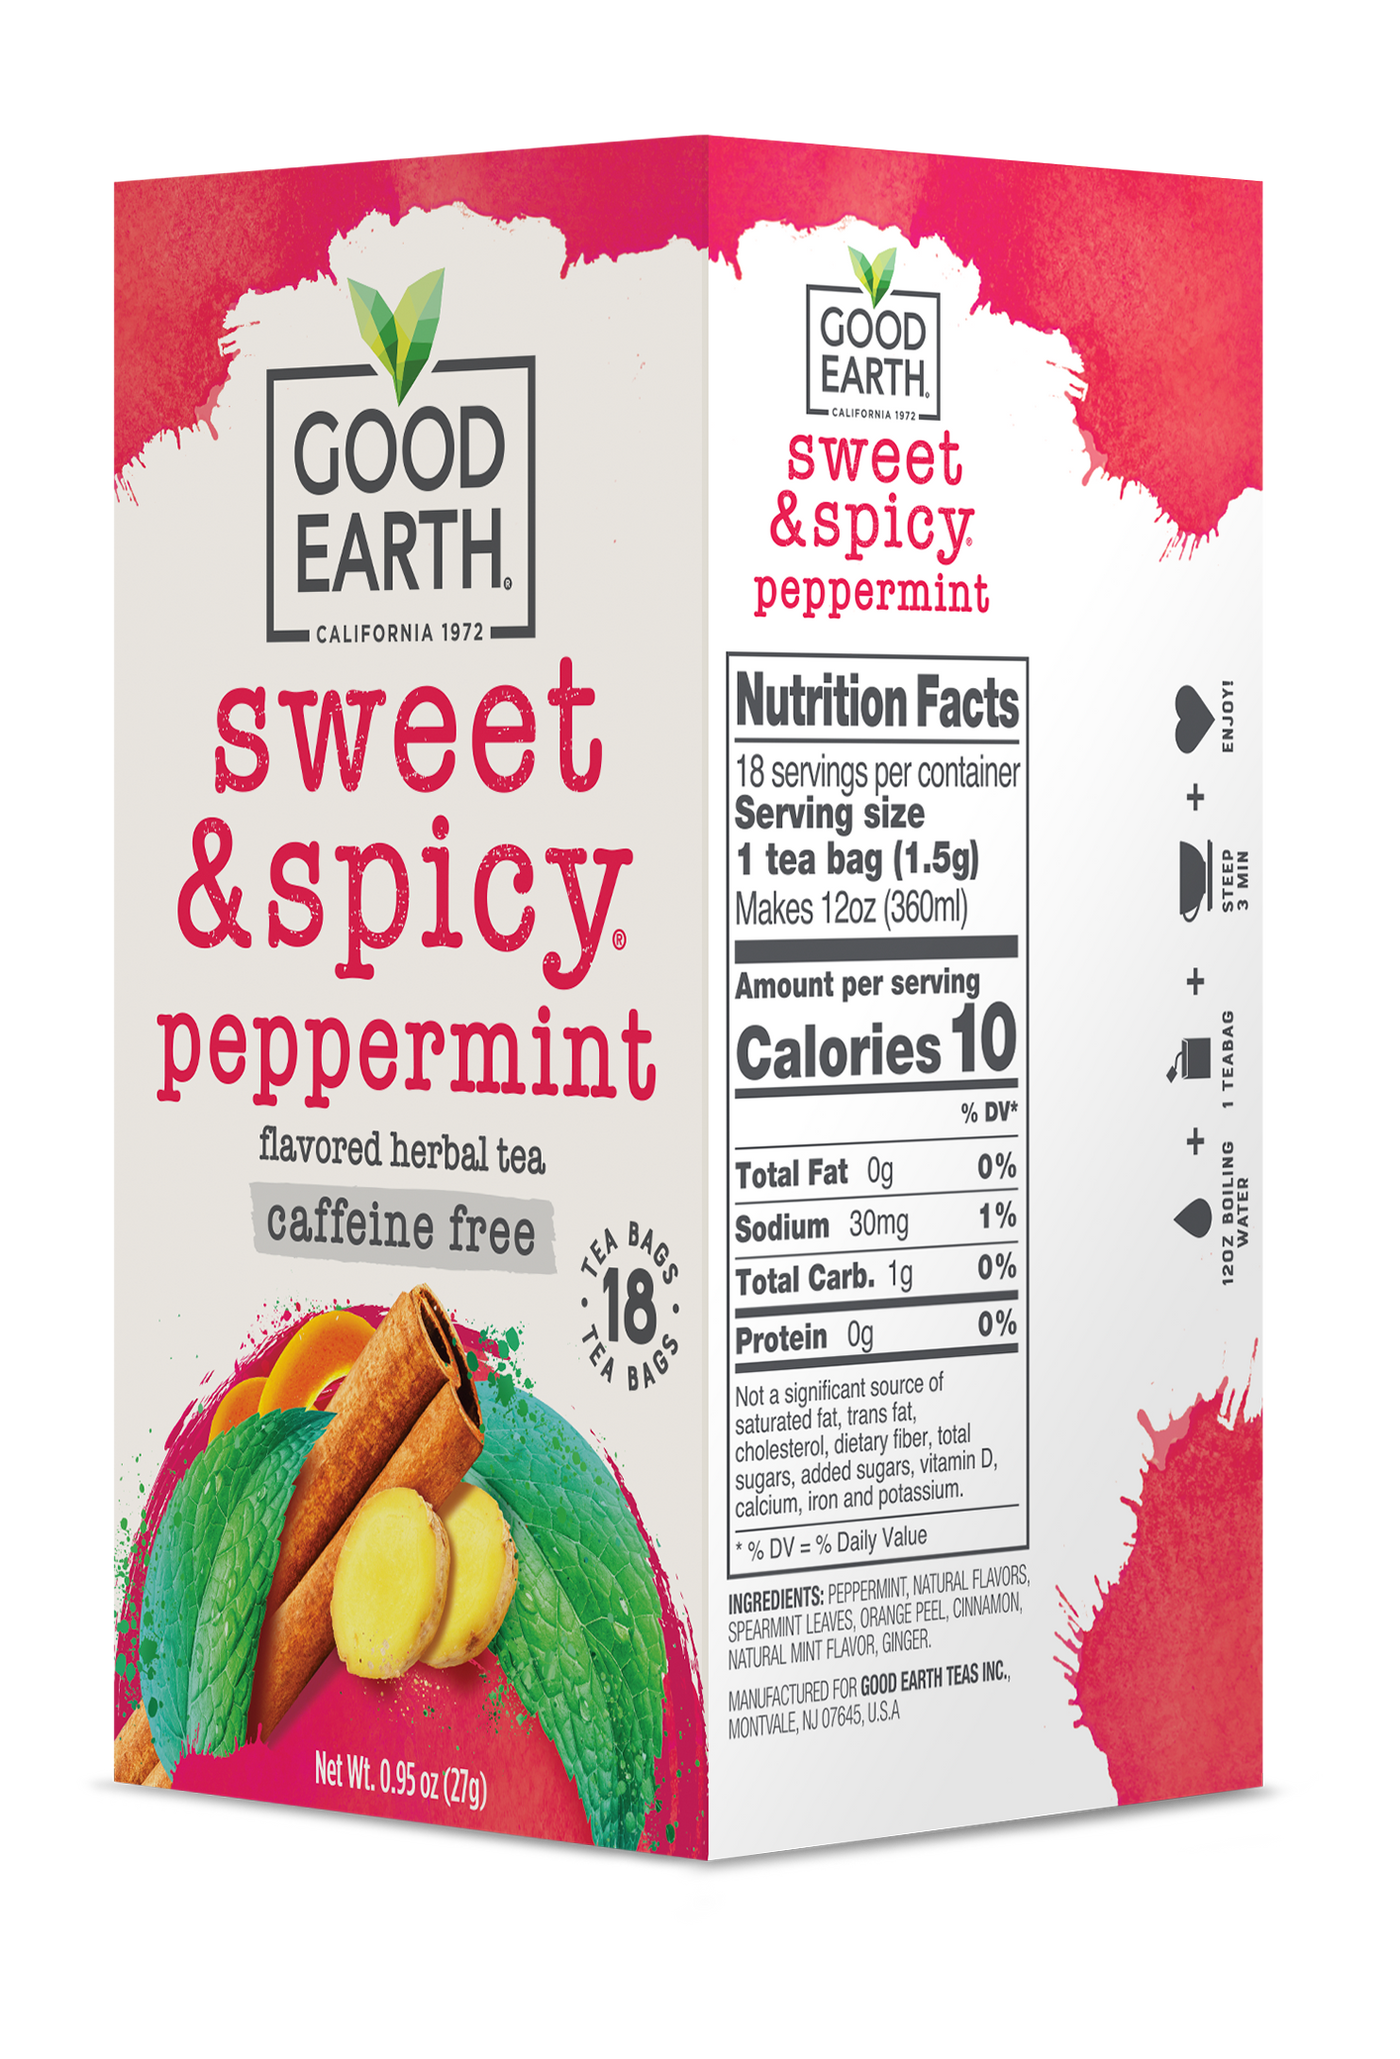 Sweet & Spicy Peppermint Caffeine Free Nutrition Facts see below